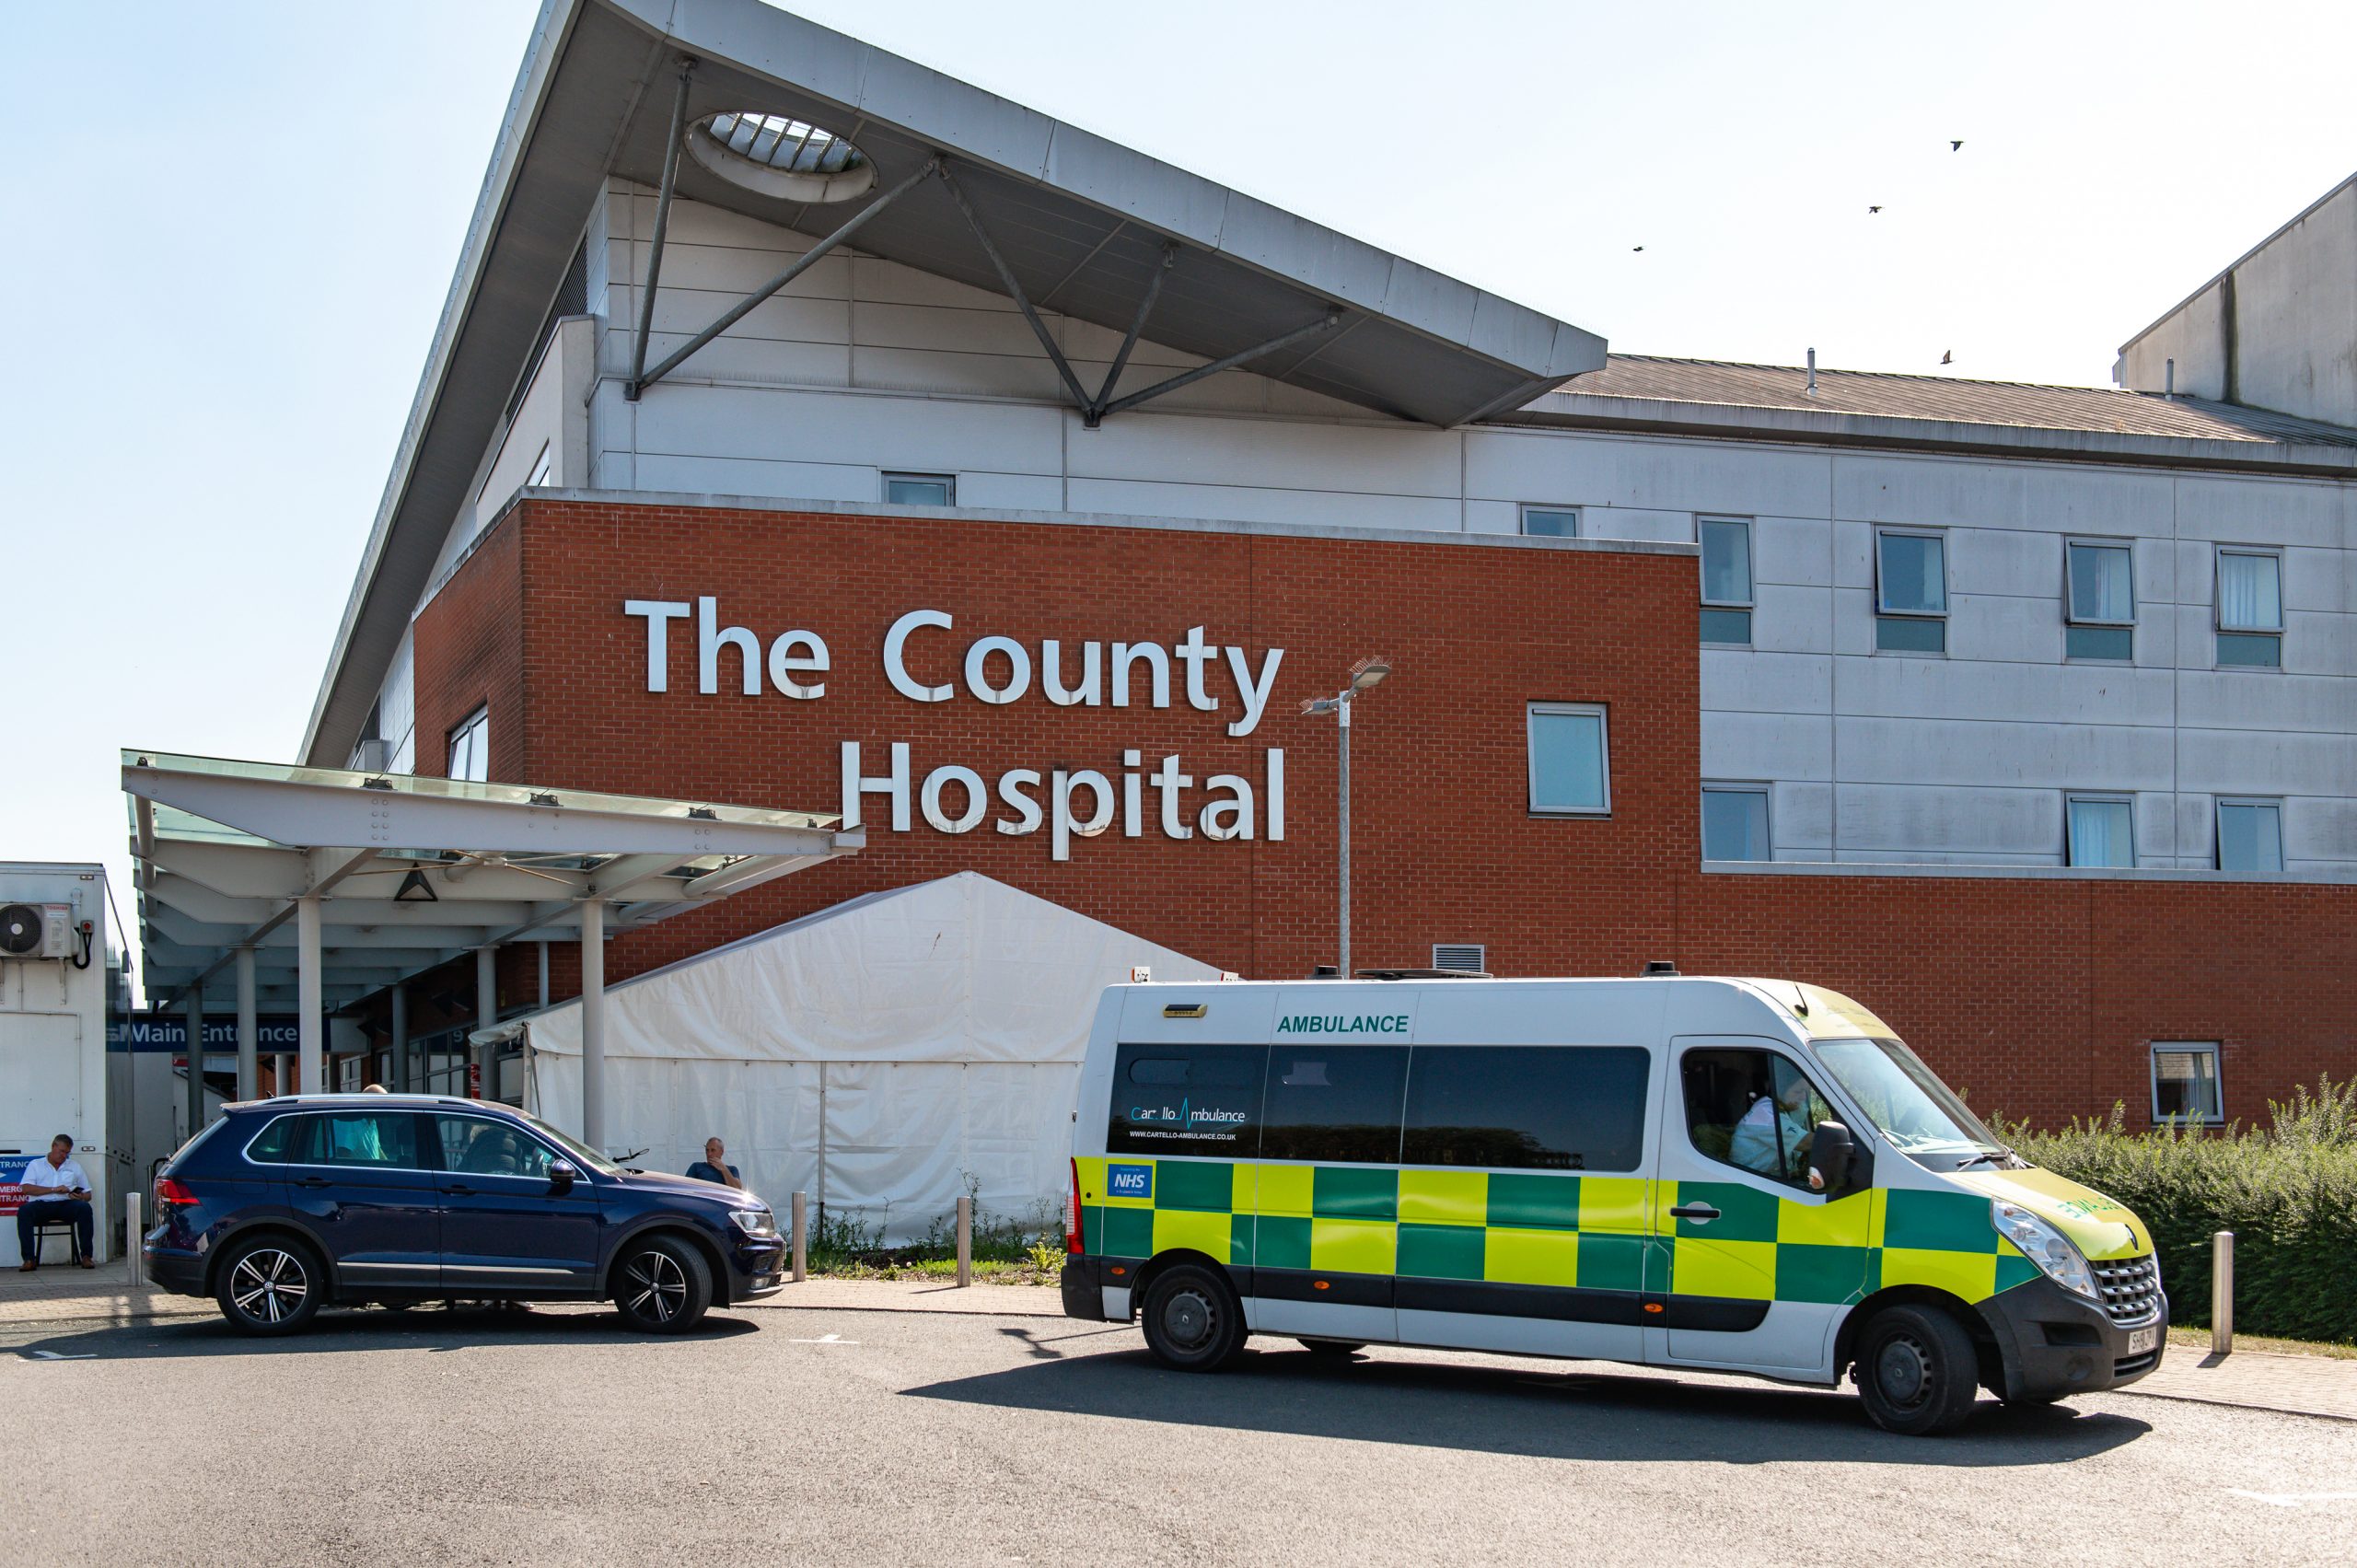 NEWS | Number of patients with COVID-19 at hospital in Herefordshire has risen